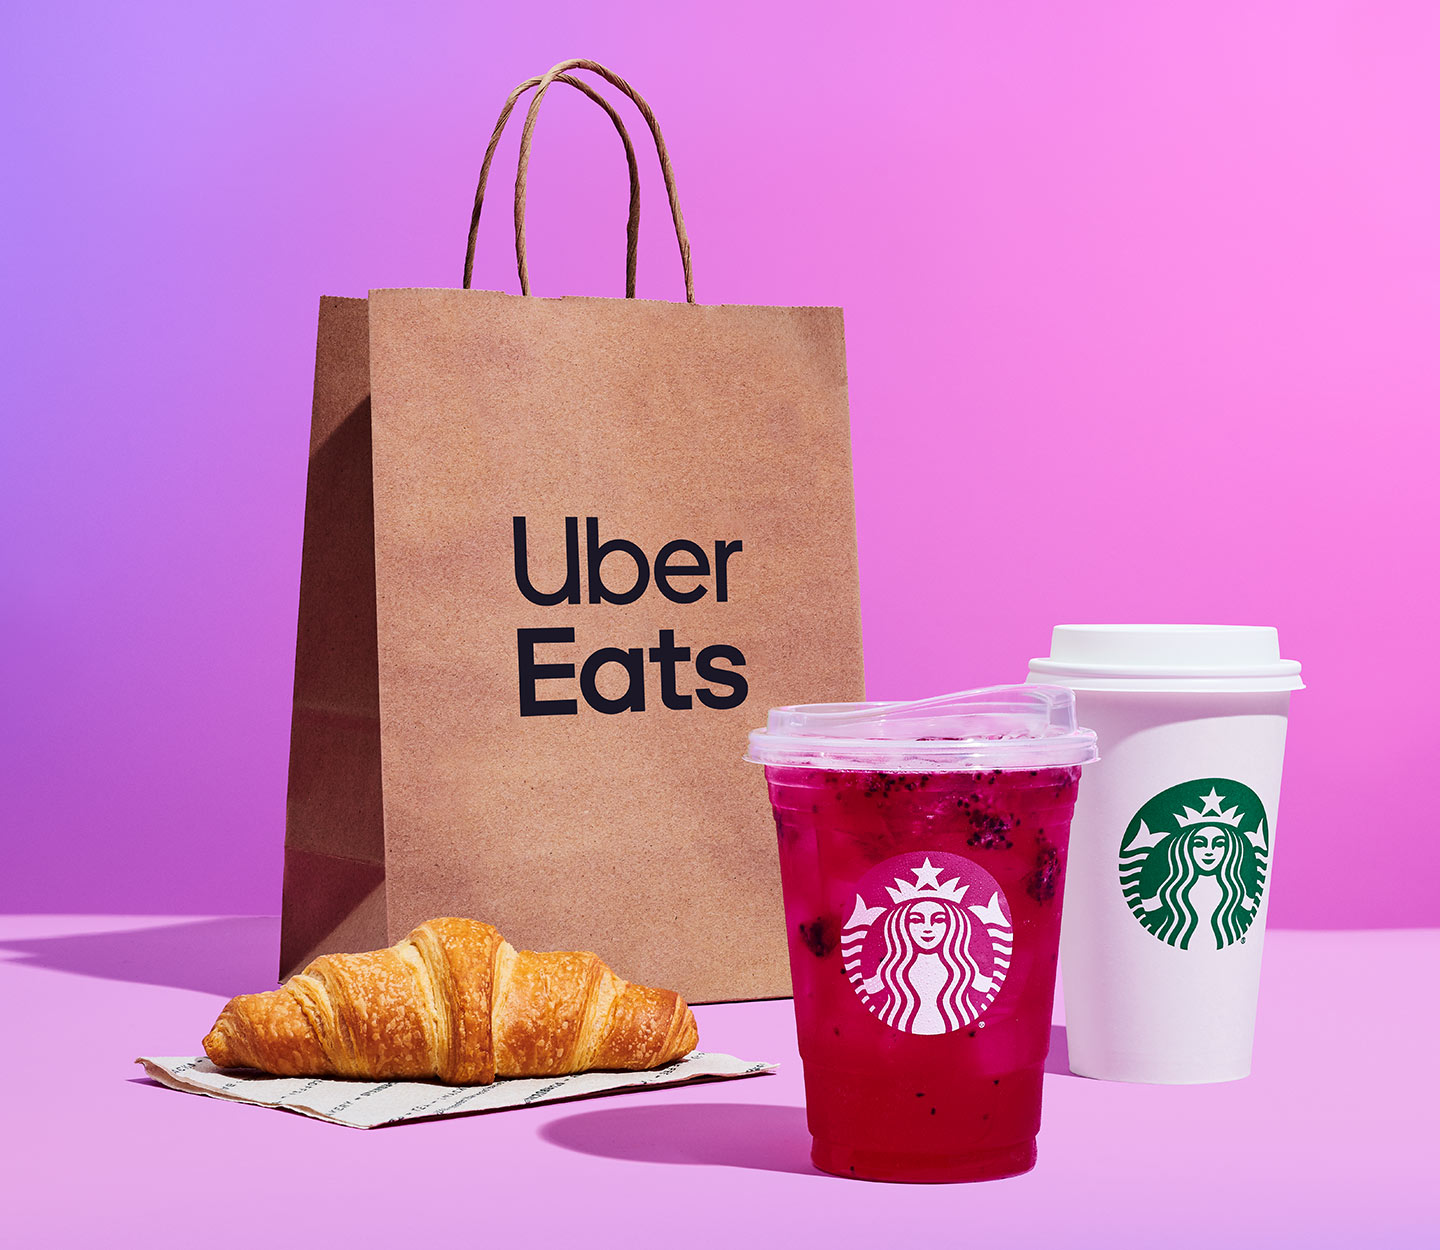 Uber Eats bag with two Starbucks drinks and a croissant.